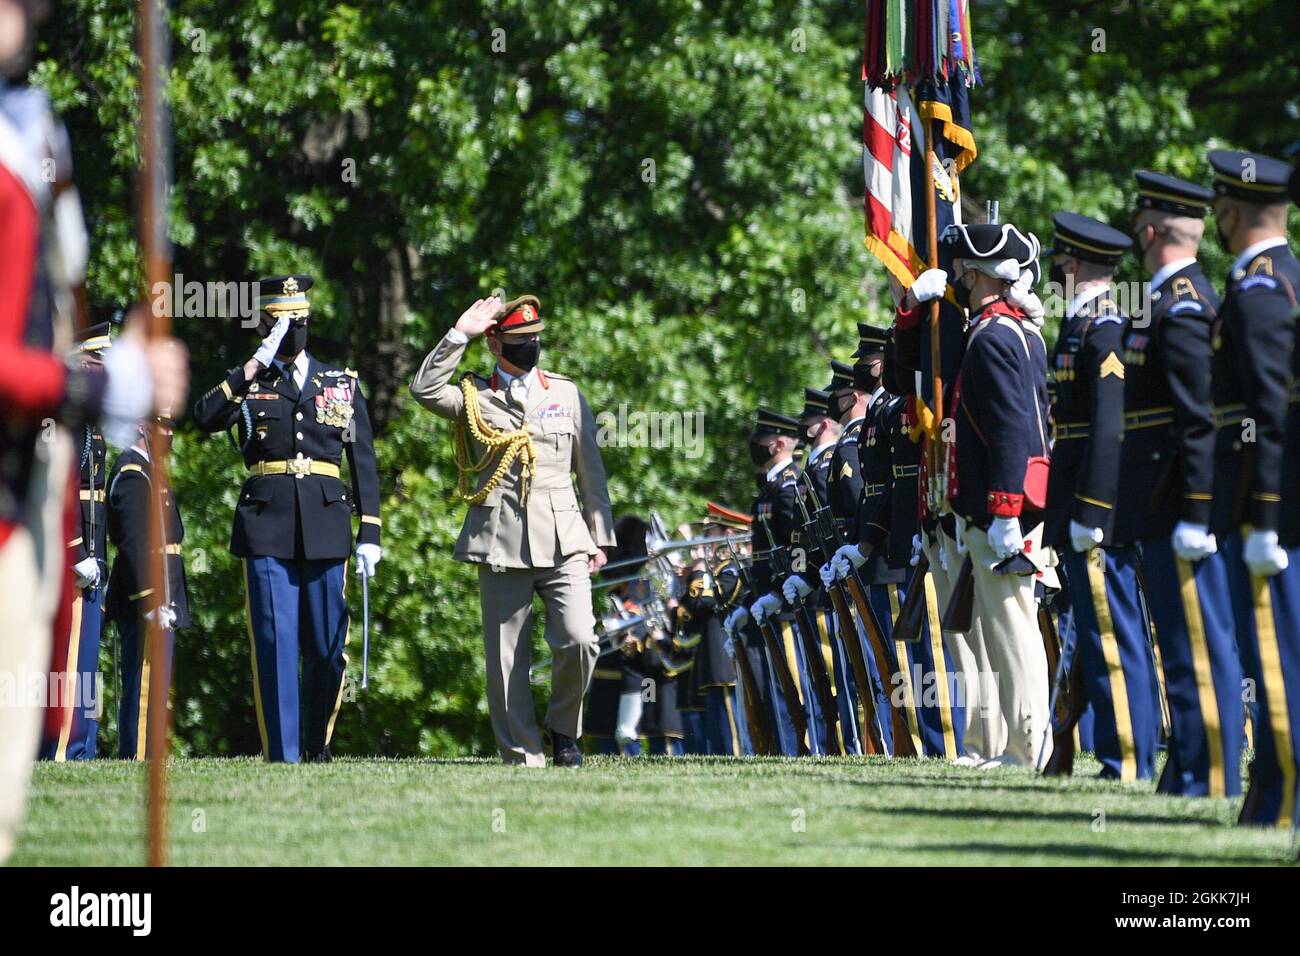 General Sir Mark Alexander Carleton-Smith, the chief of the General Staff of the British Army, renders honors during an Army Full Honor Arrival Ceremony at Whipple Field, Joint Base Myer-Henderson Hall, Arlington, Va., May 13, 2021. Stock Photo